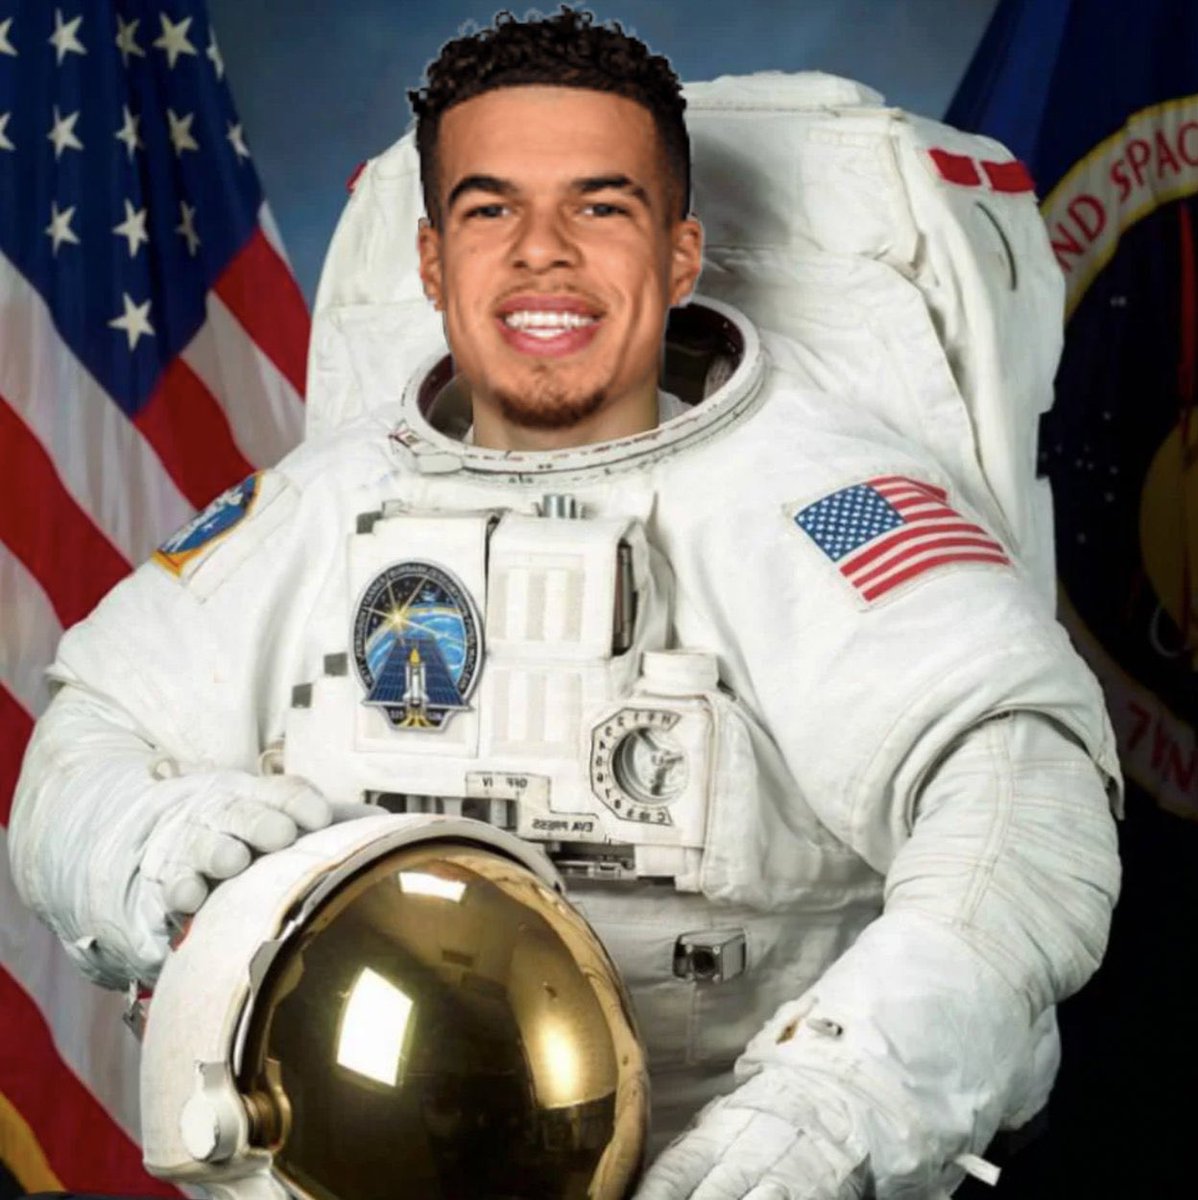 “bro, they found green on the moon” mpj: